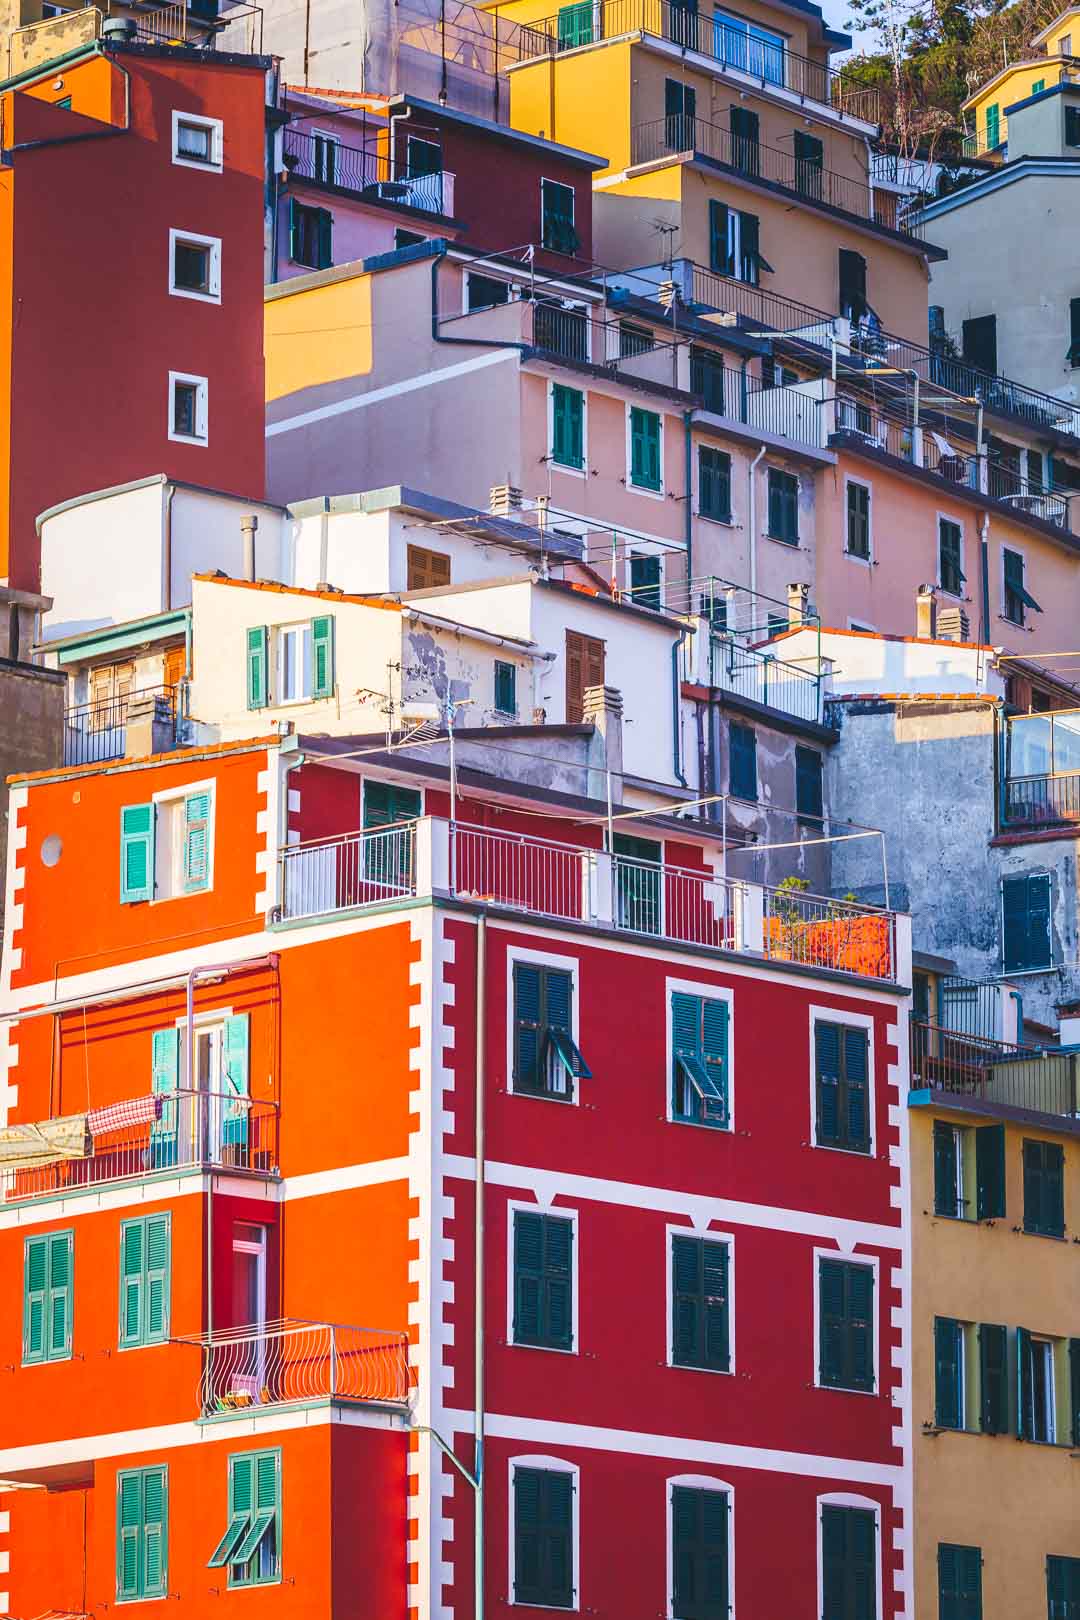 close up of the houses of riomaggiore